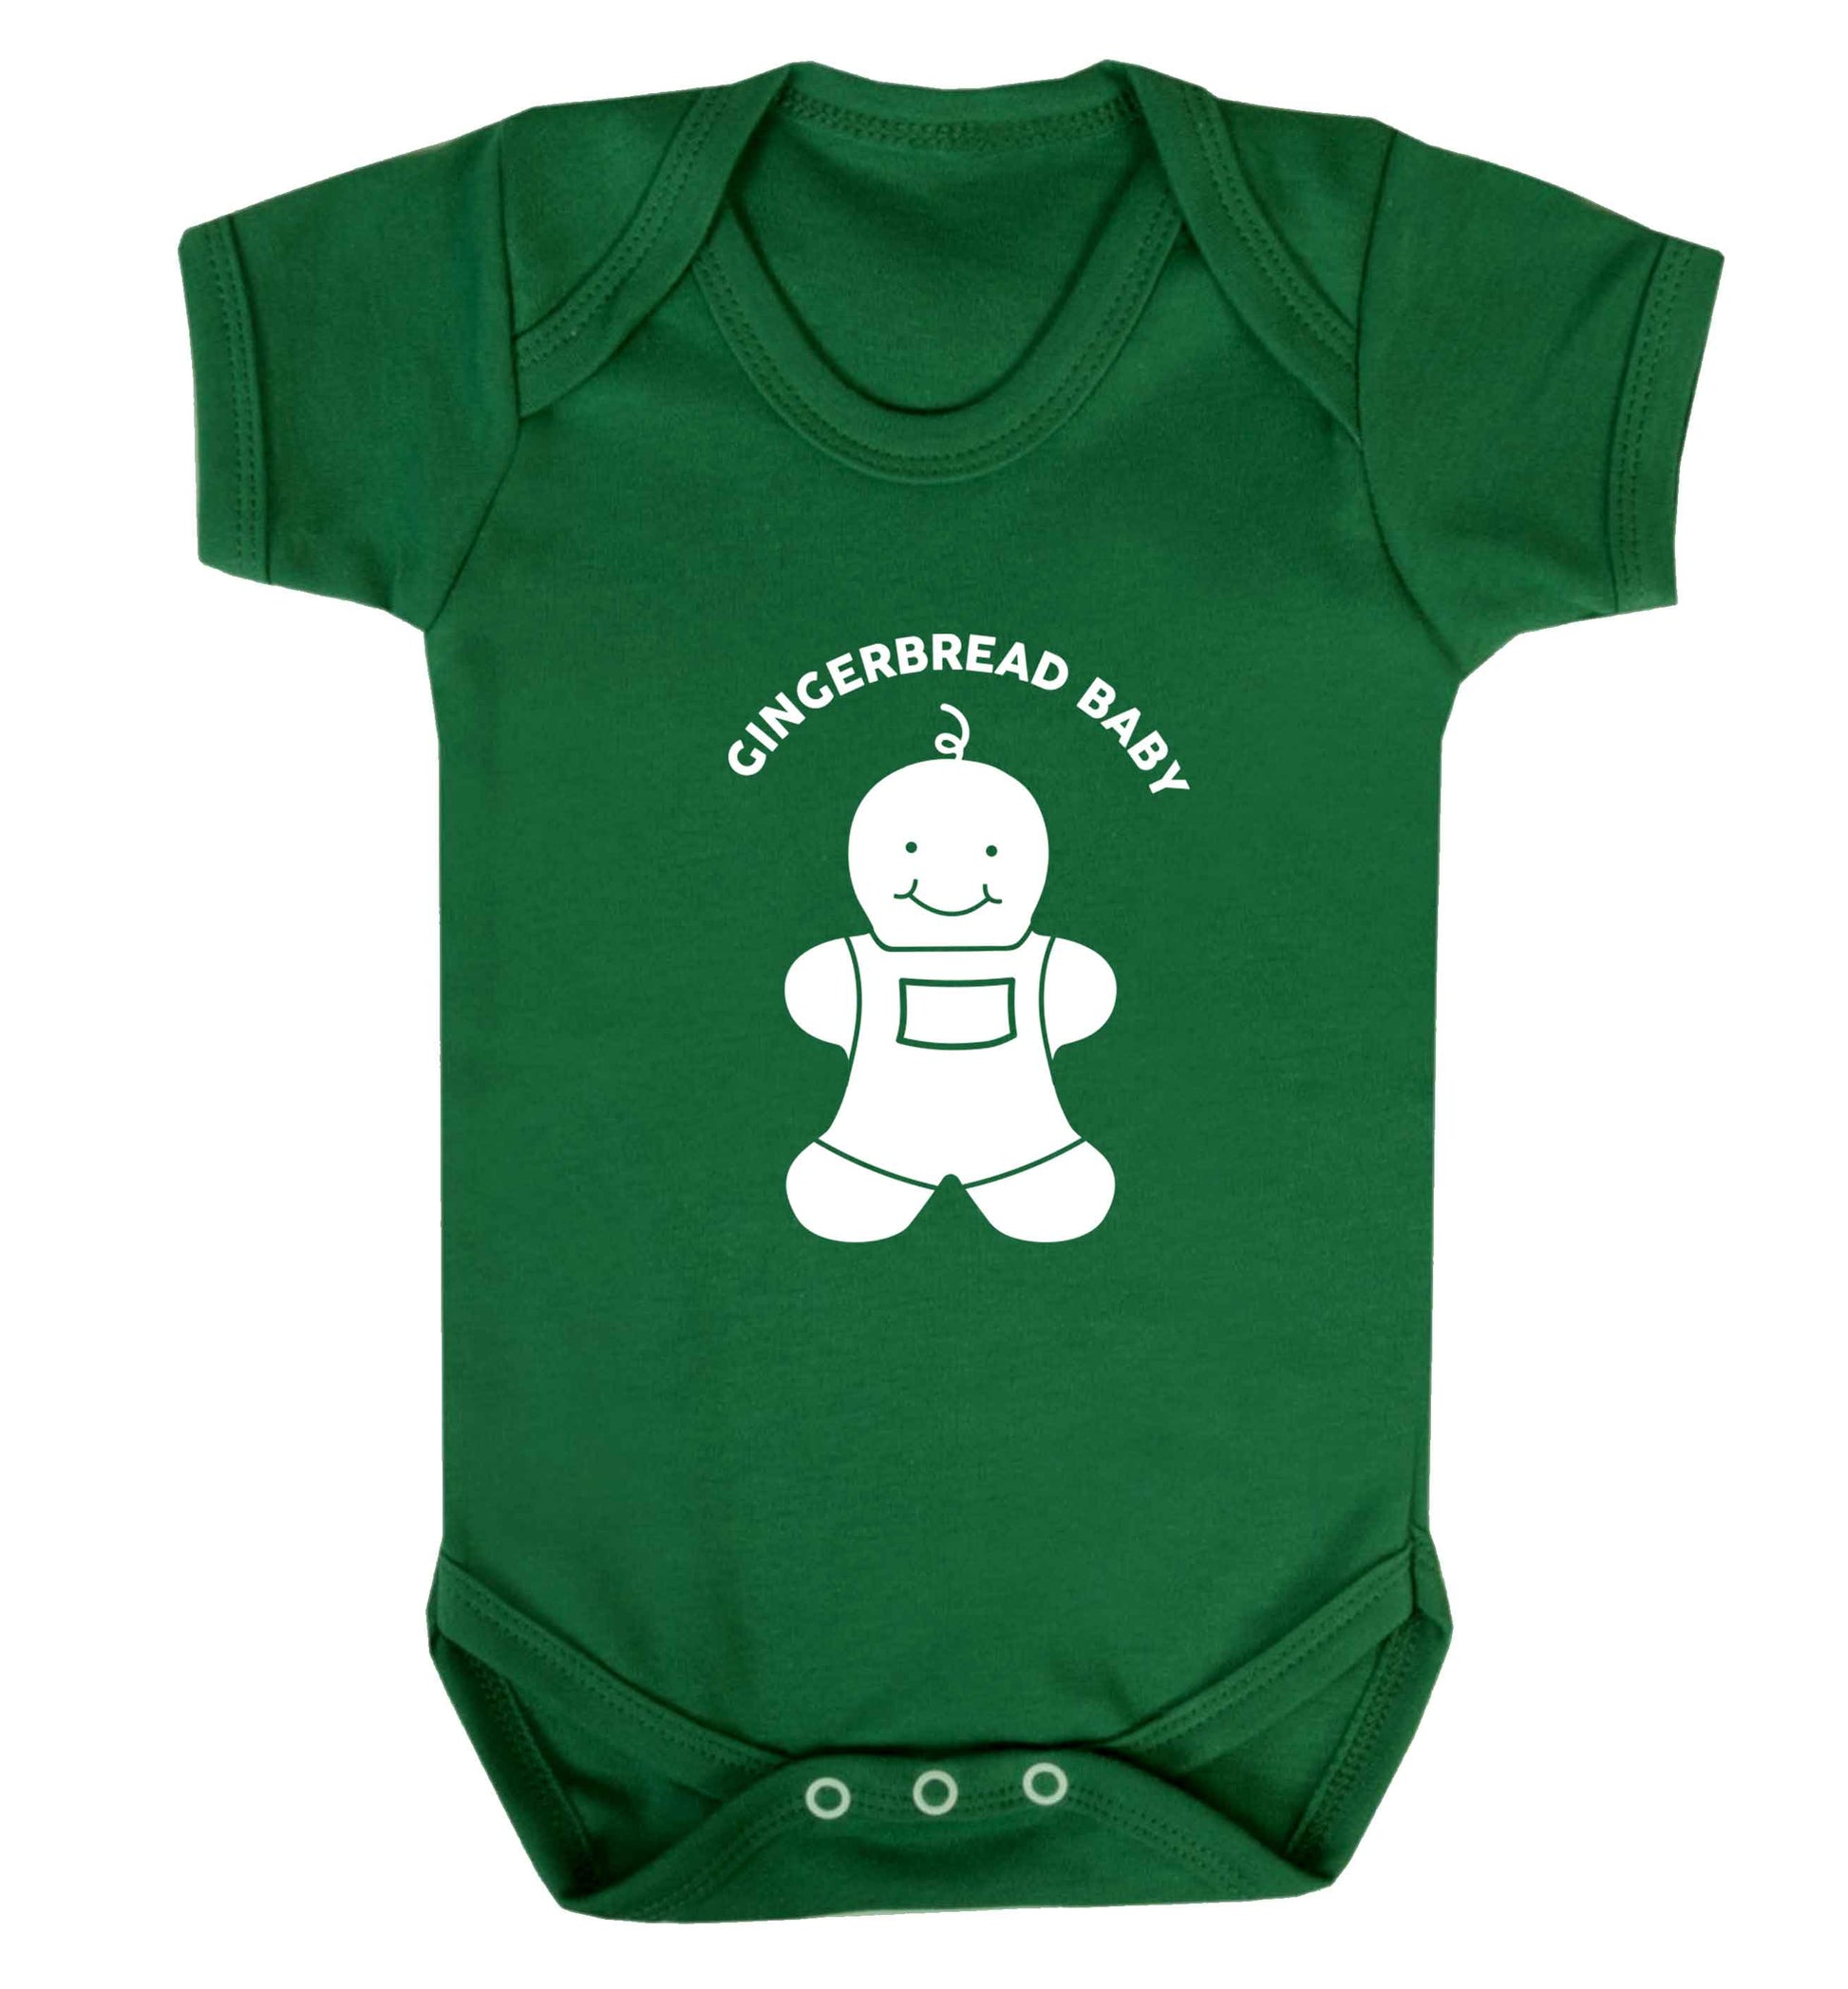 Gingerbread baby baby vest green 18-24 months